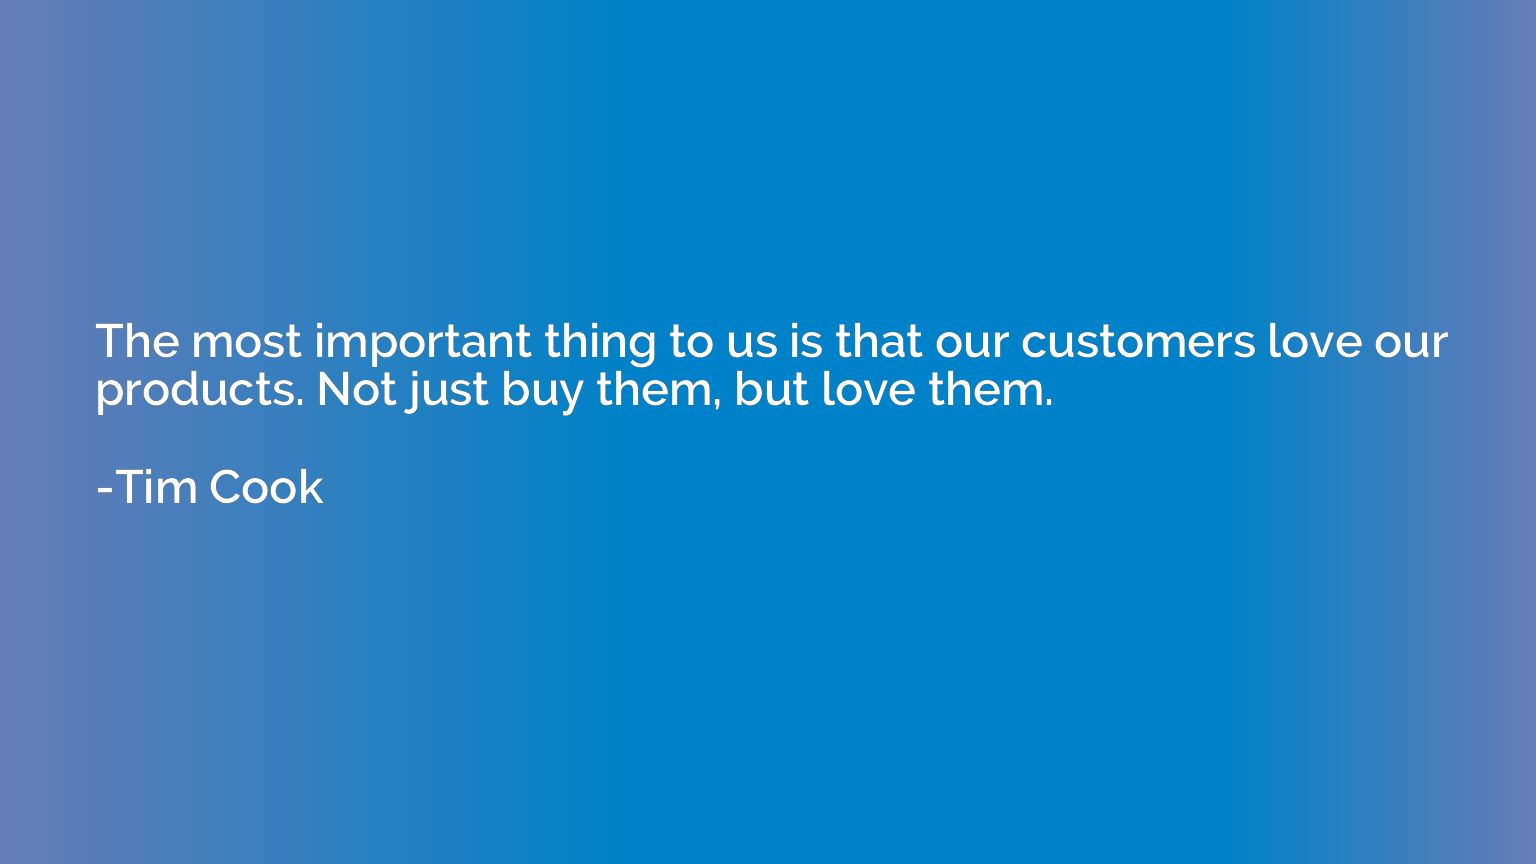 The most important thing to us is that our customers love ou